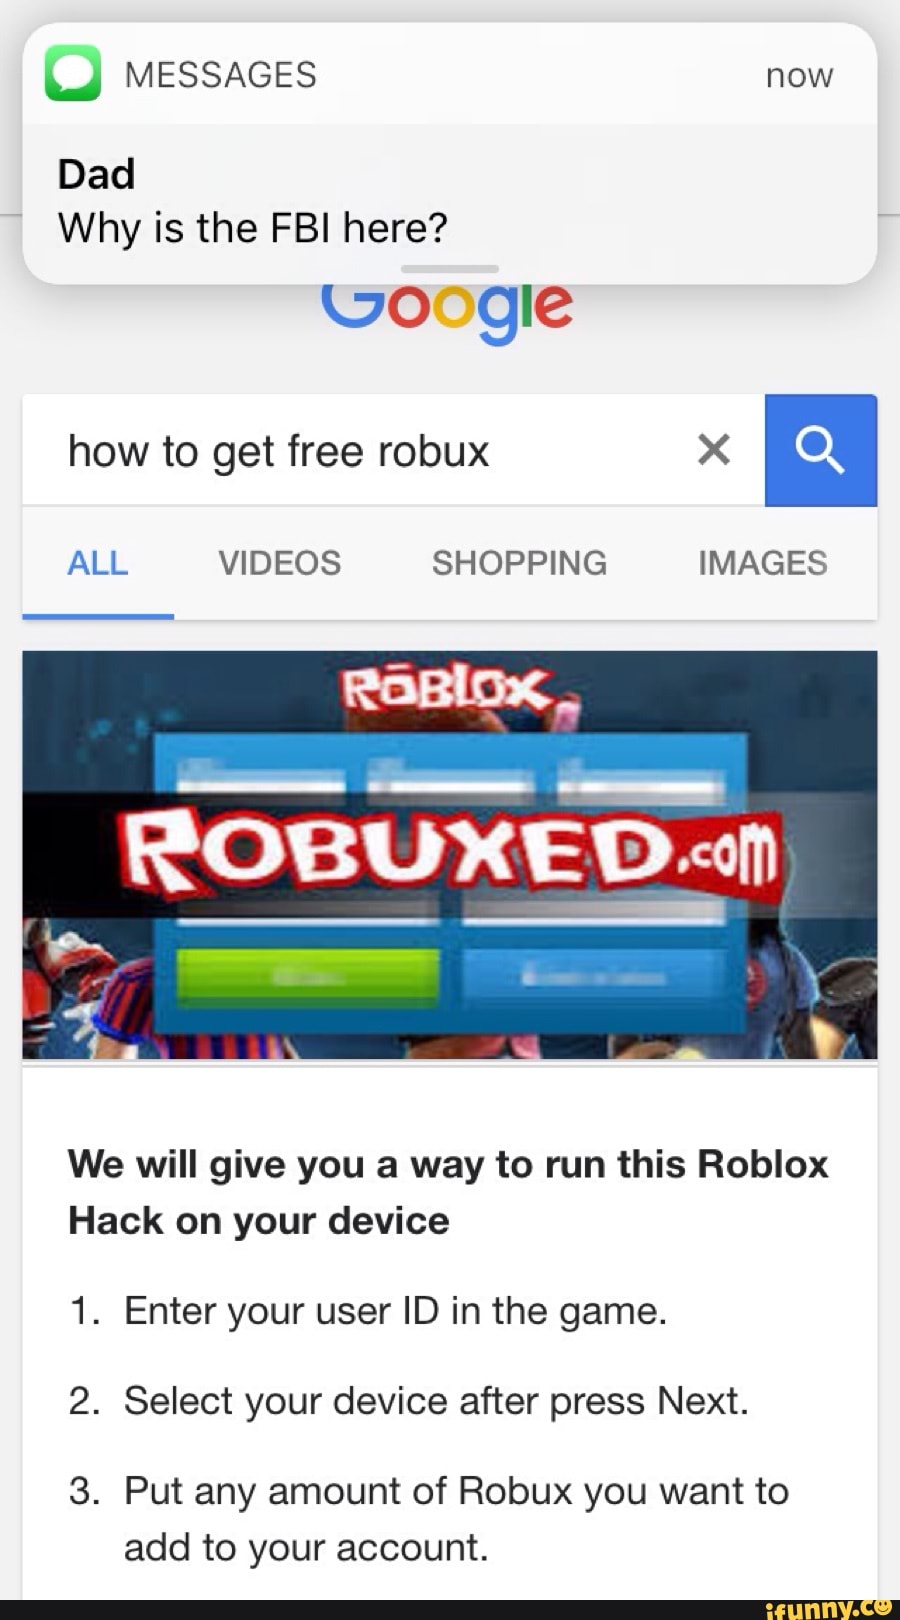 Dad Why Is The Fbi Here Uo Gle How To Get Free Robux A All